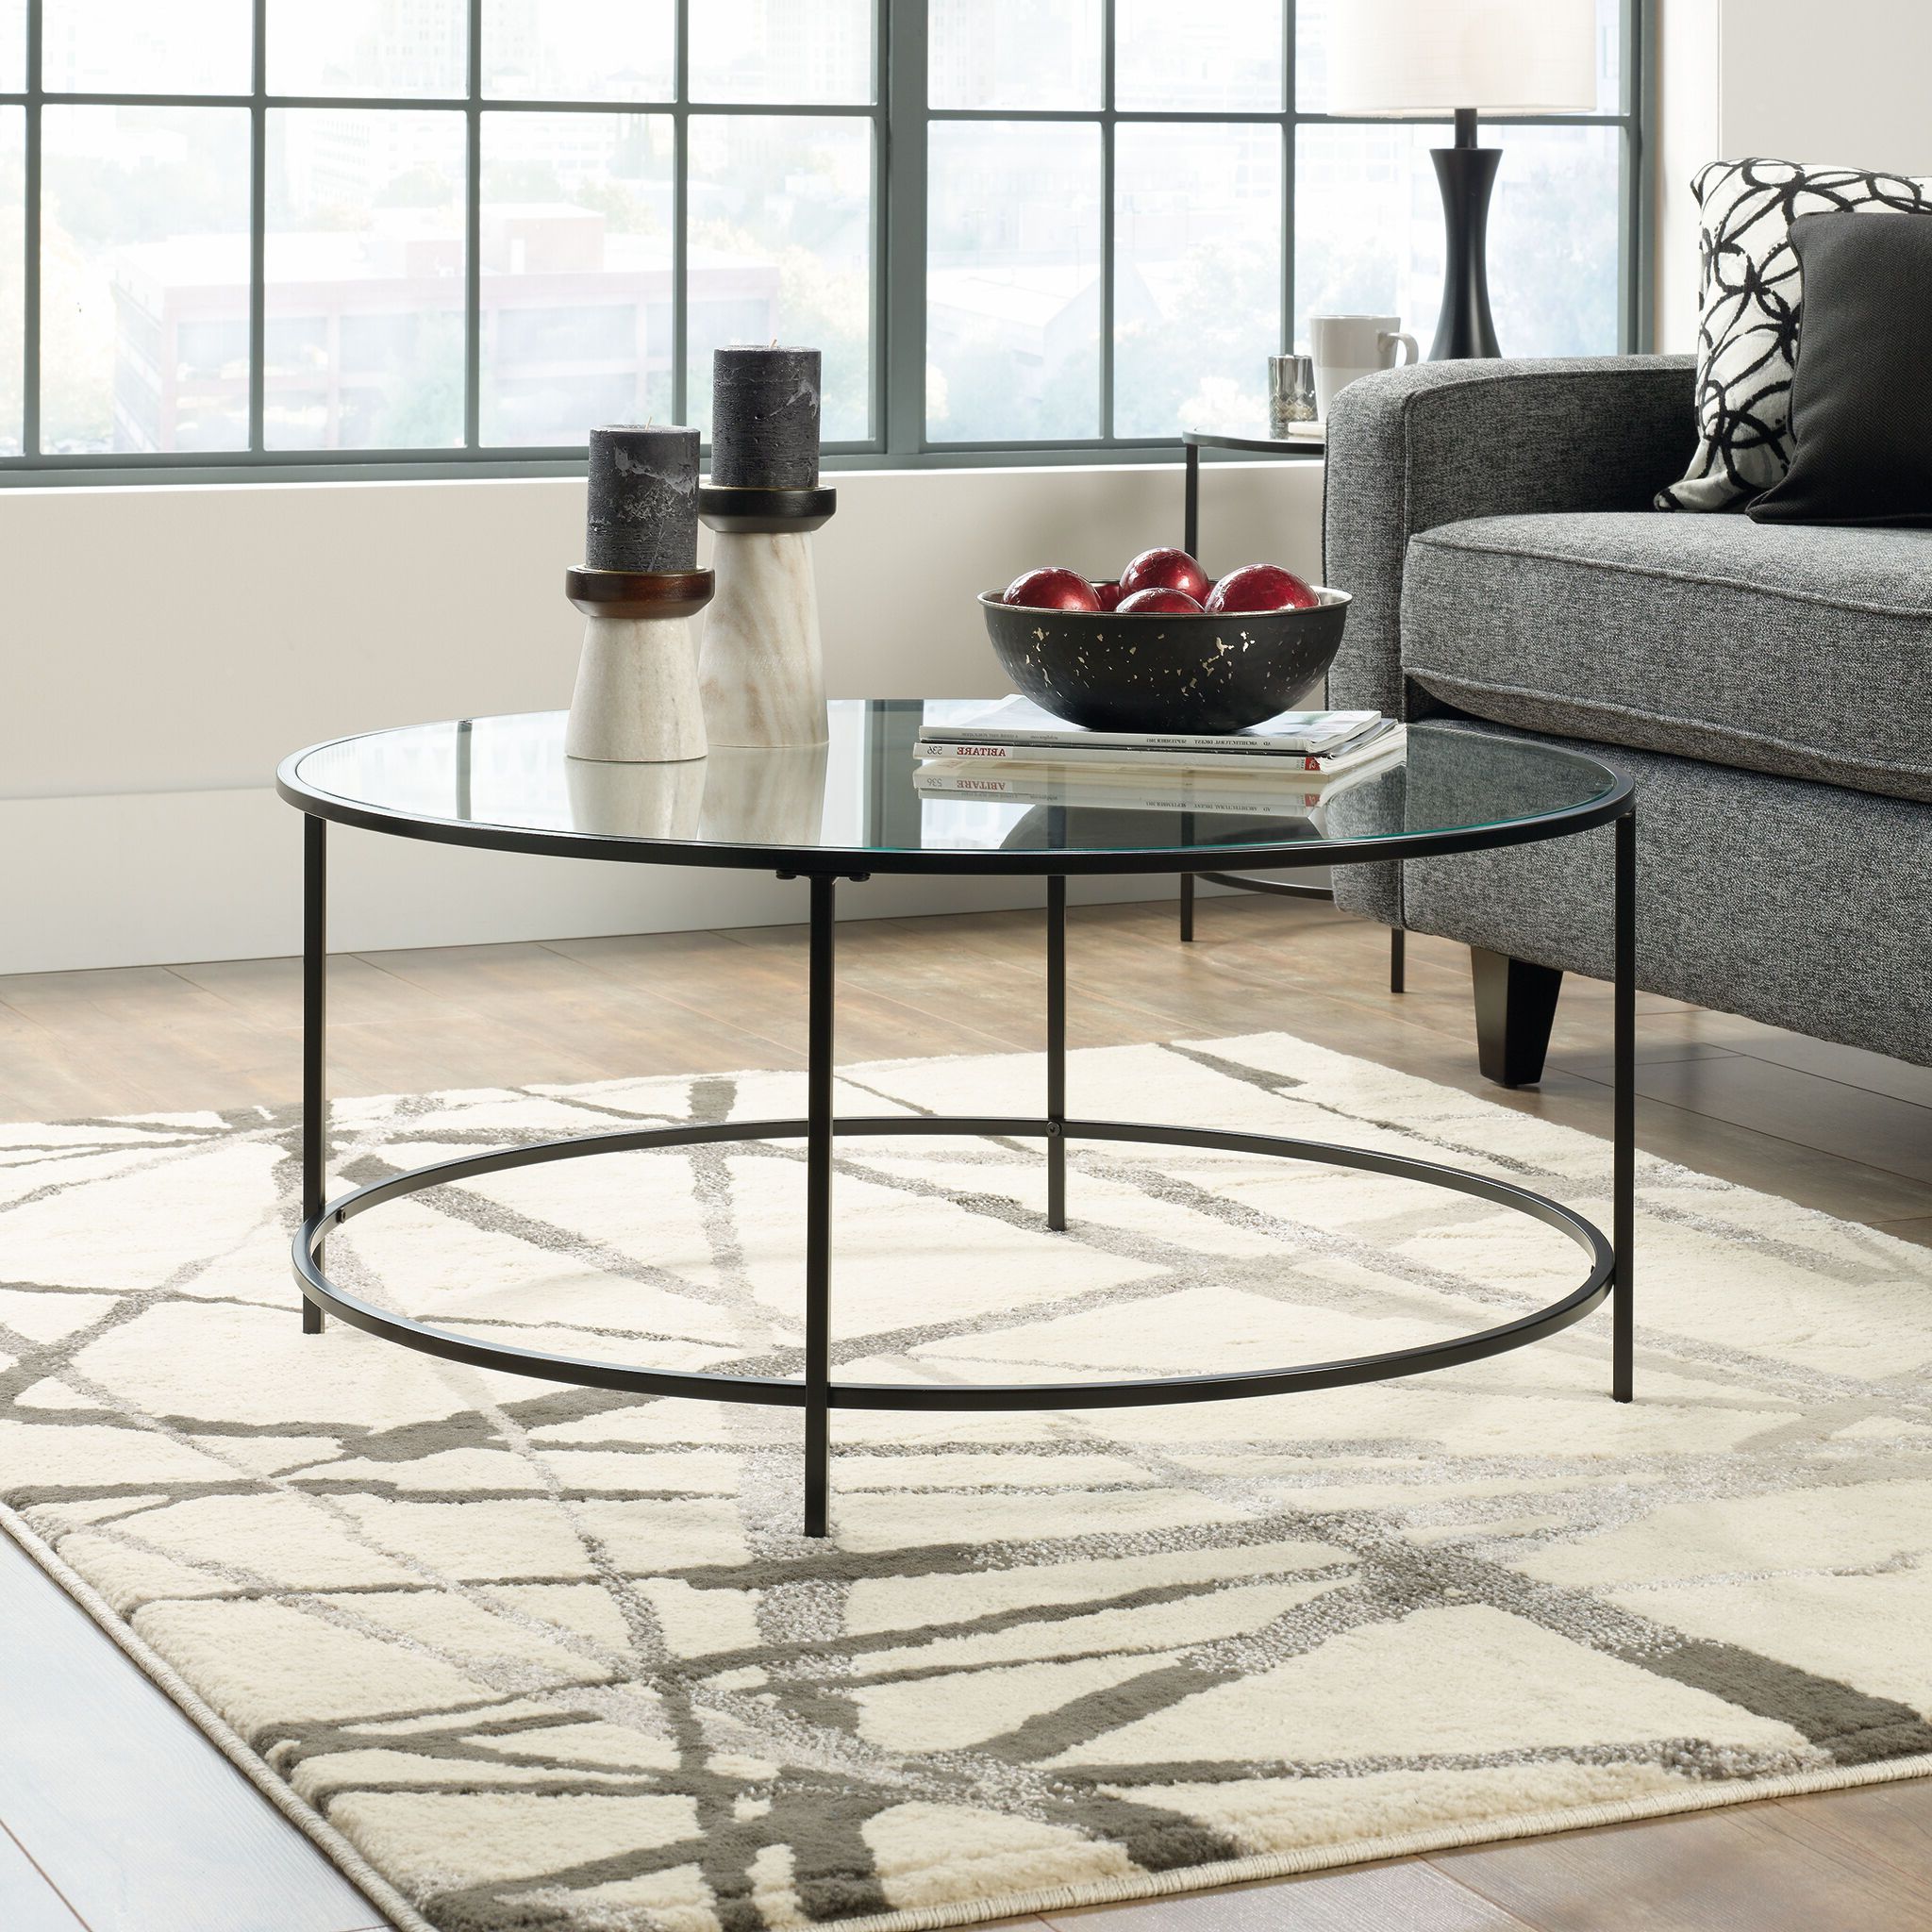 Full Black Round Coffee Tables Inside Most Popular Round Contemporary Coffee Table In Black (Photo 1 of 15)